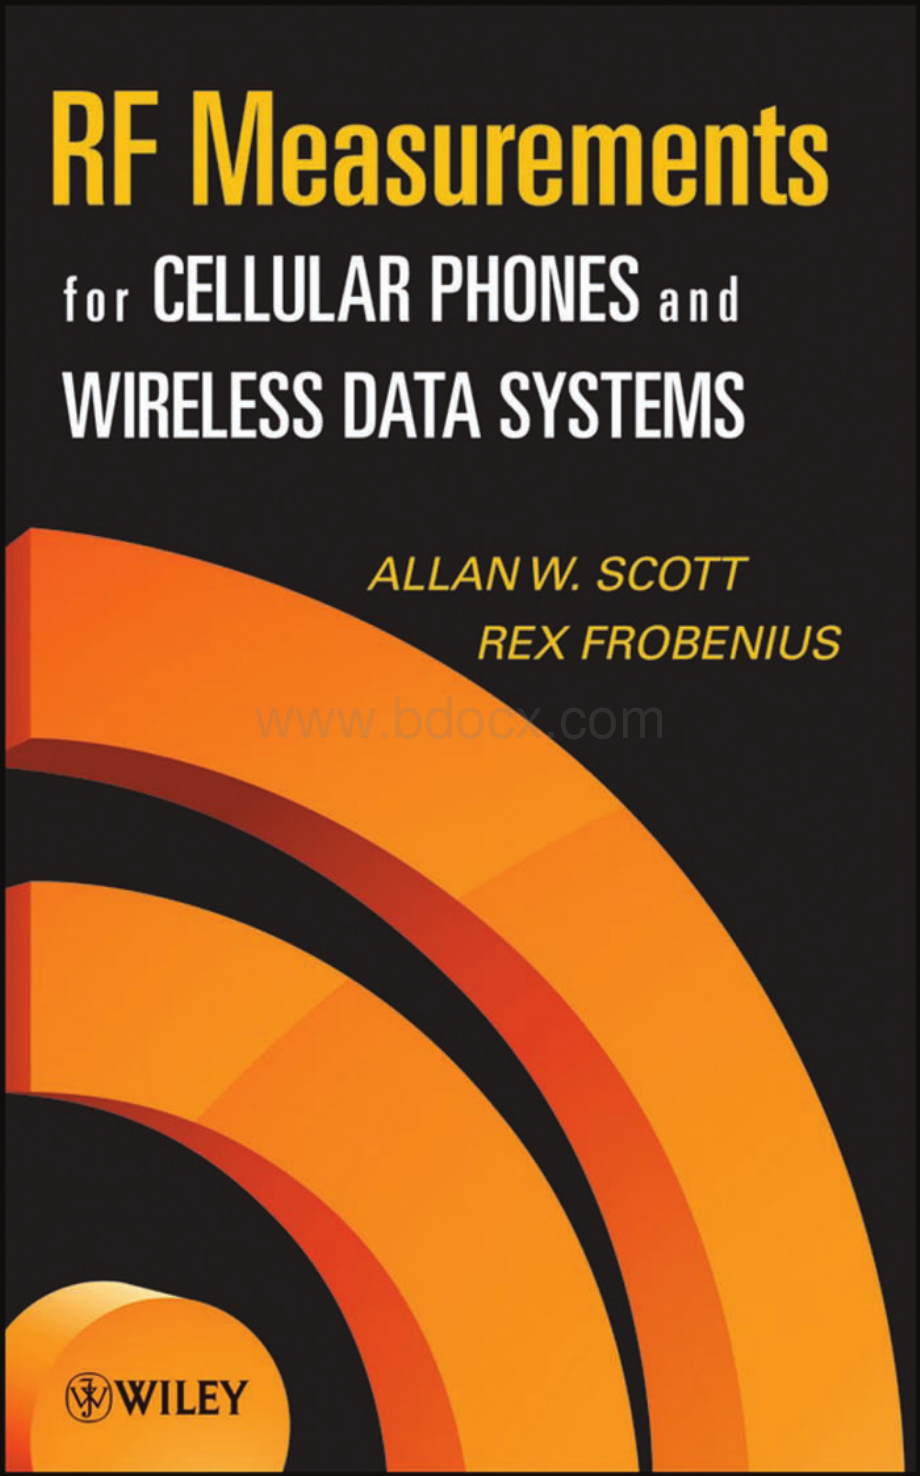 RF Measurements for Cellular Phones and Wireless Data Systems.pdf